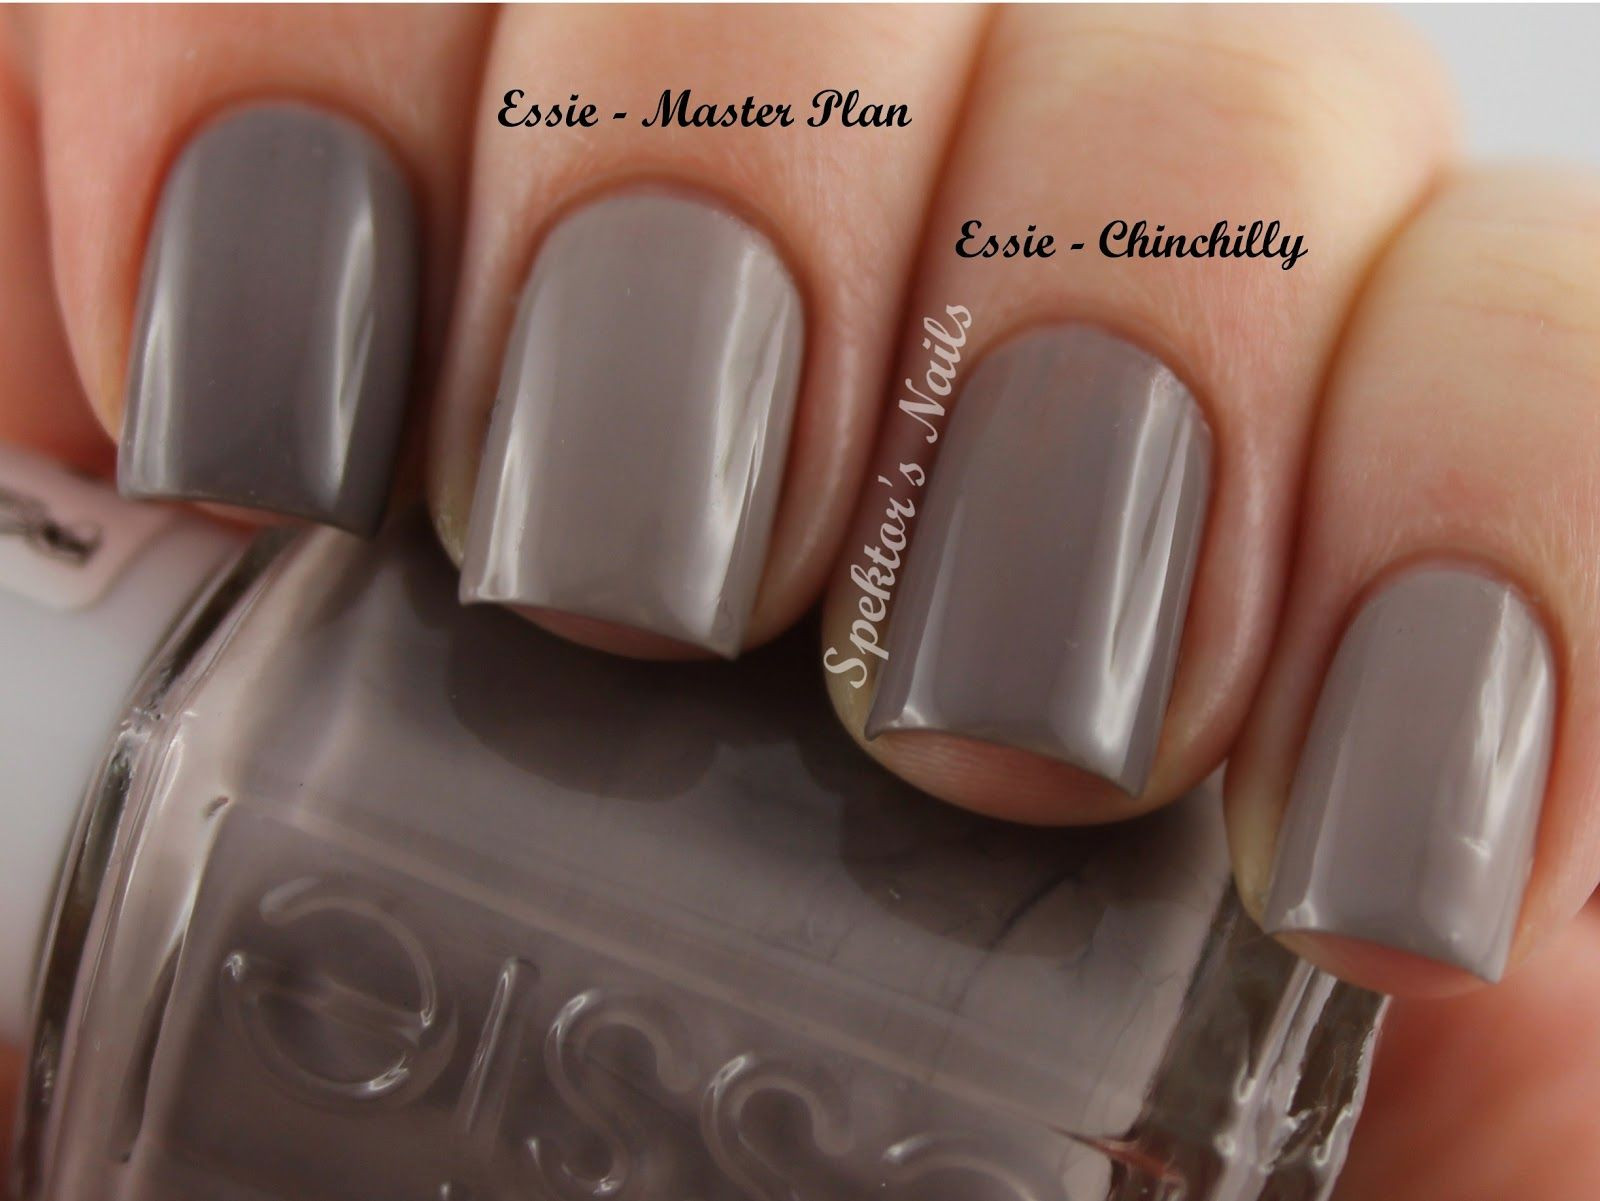 Winter Nail Colors For Pale Skin
 Nude polish for the winter Essie Master Plan and